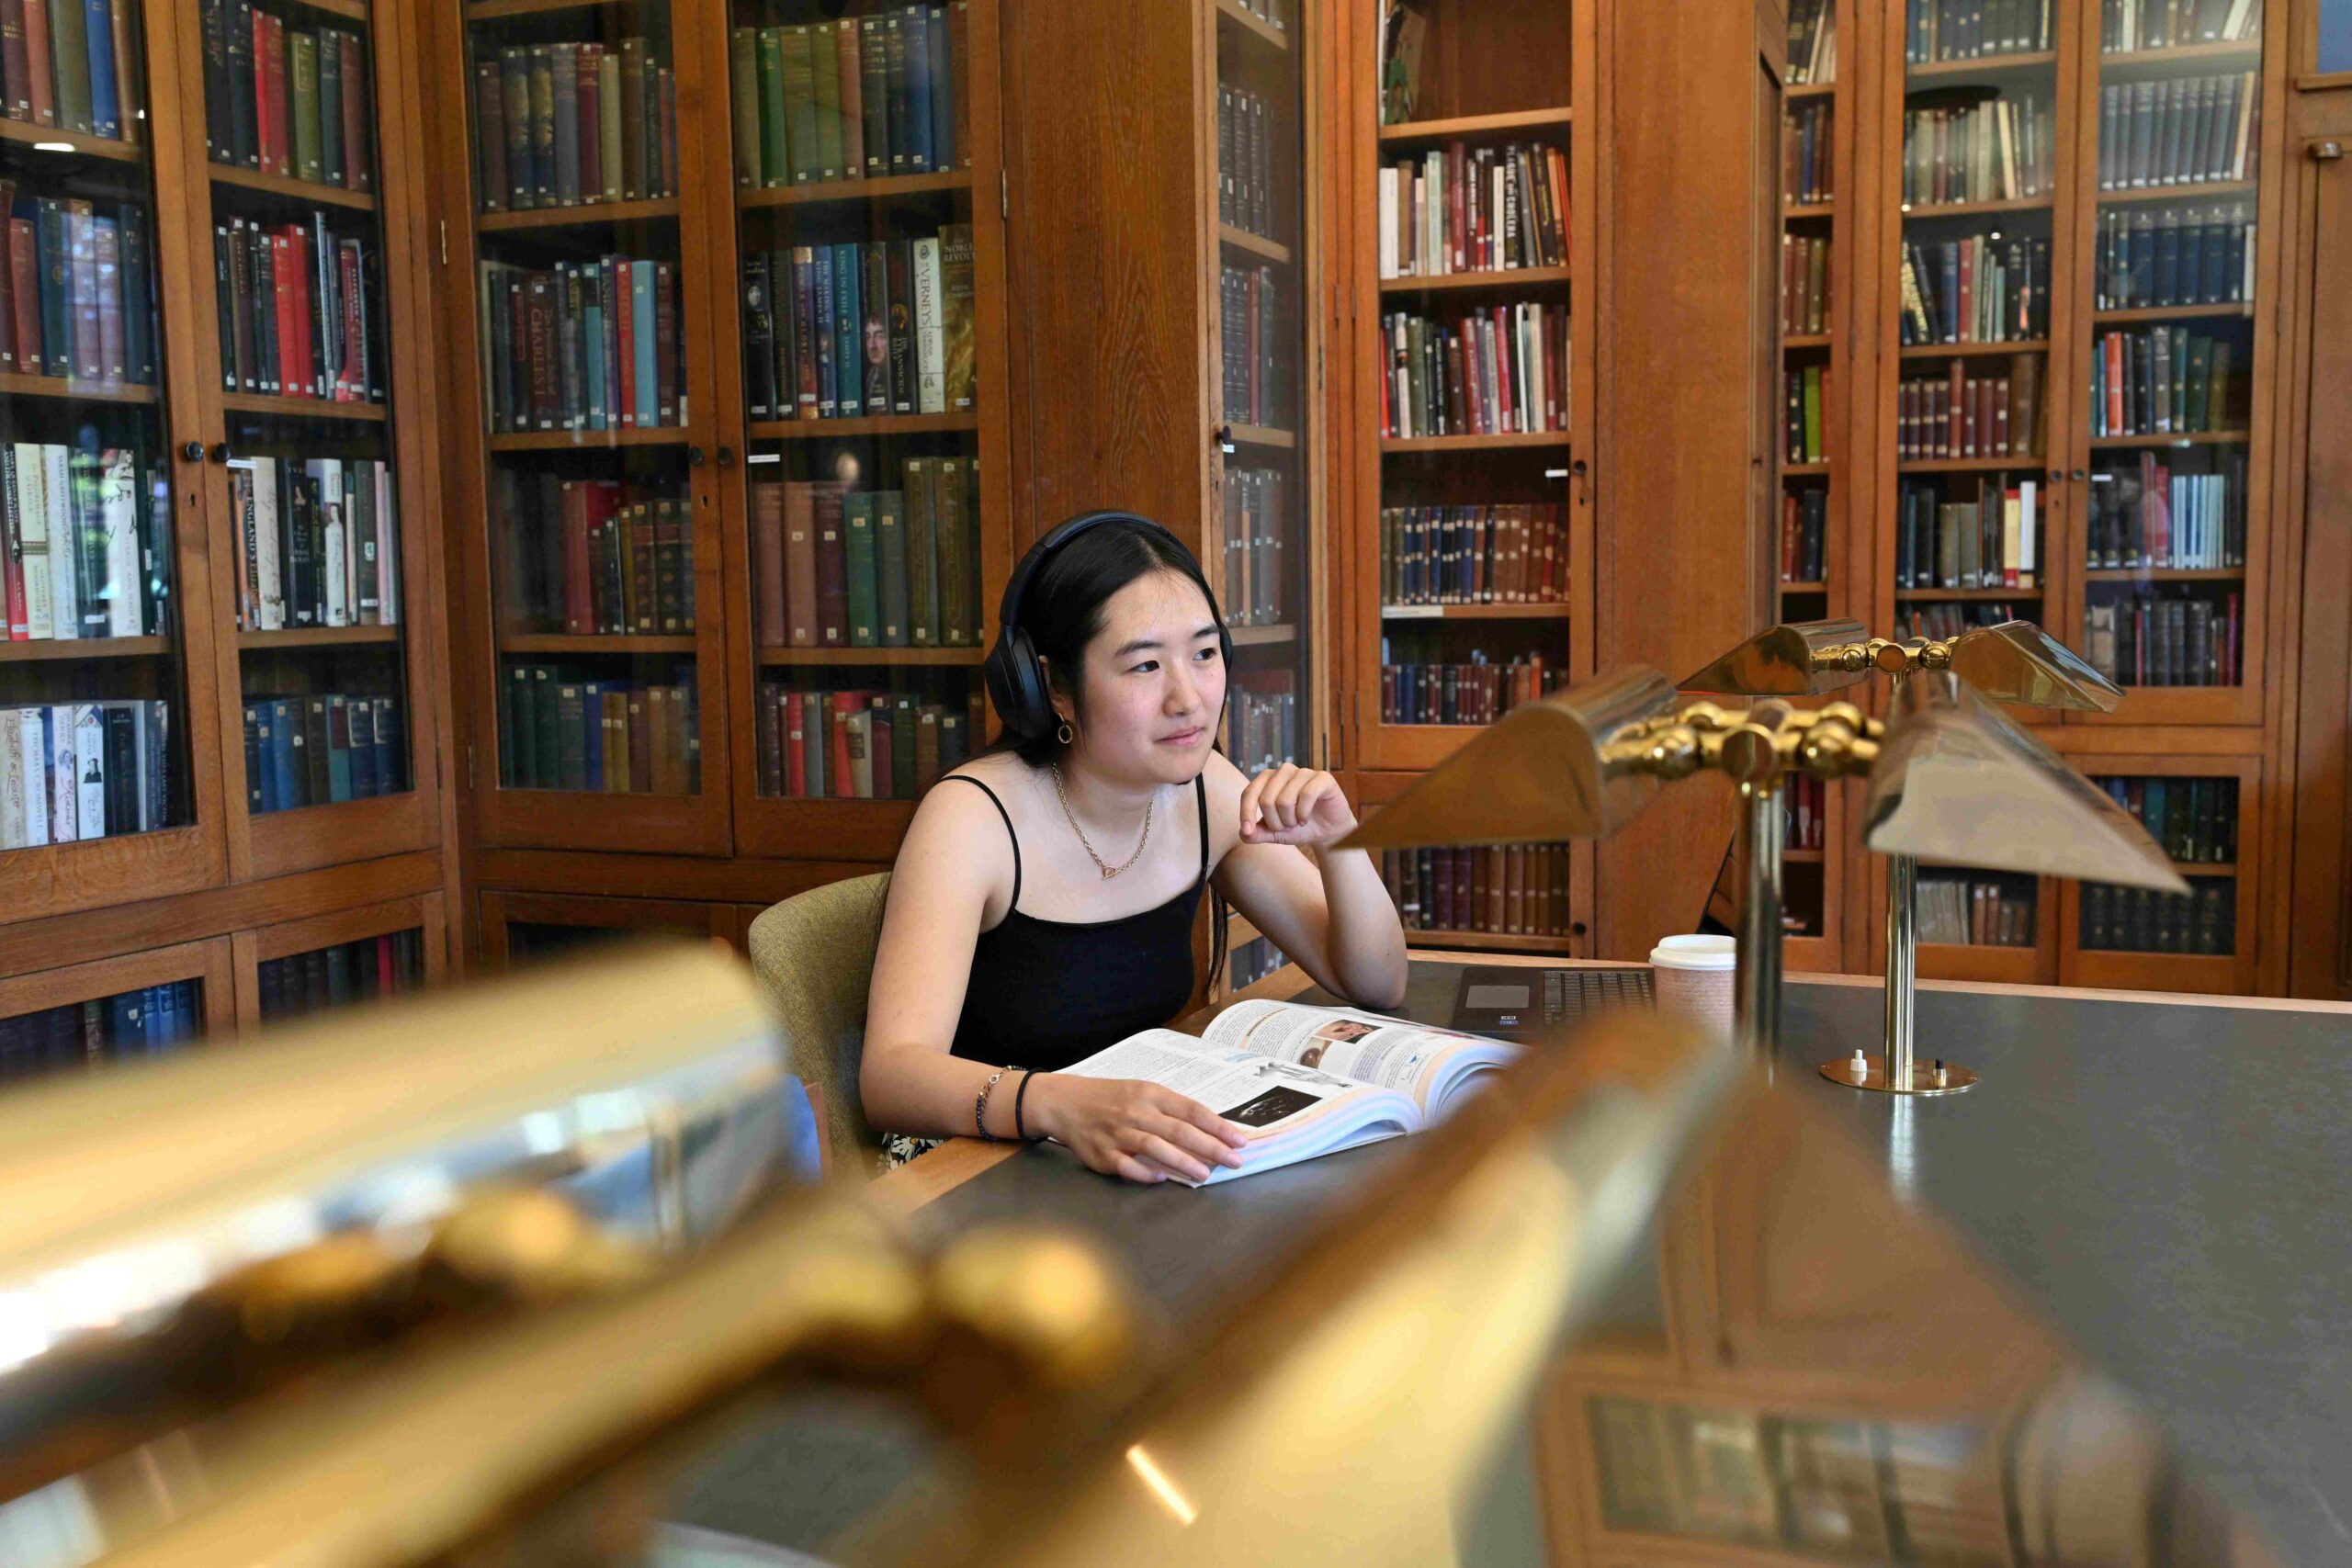 A student sits at a desk in a library with brass lamp in the foreground